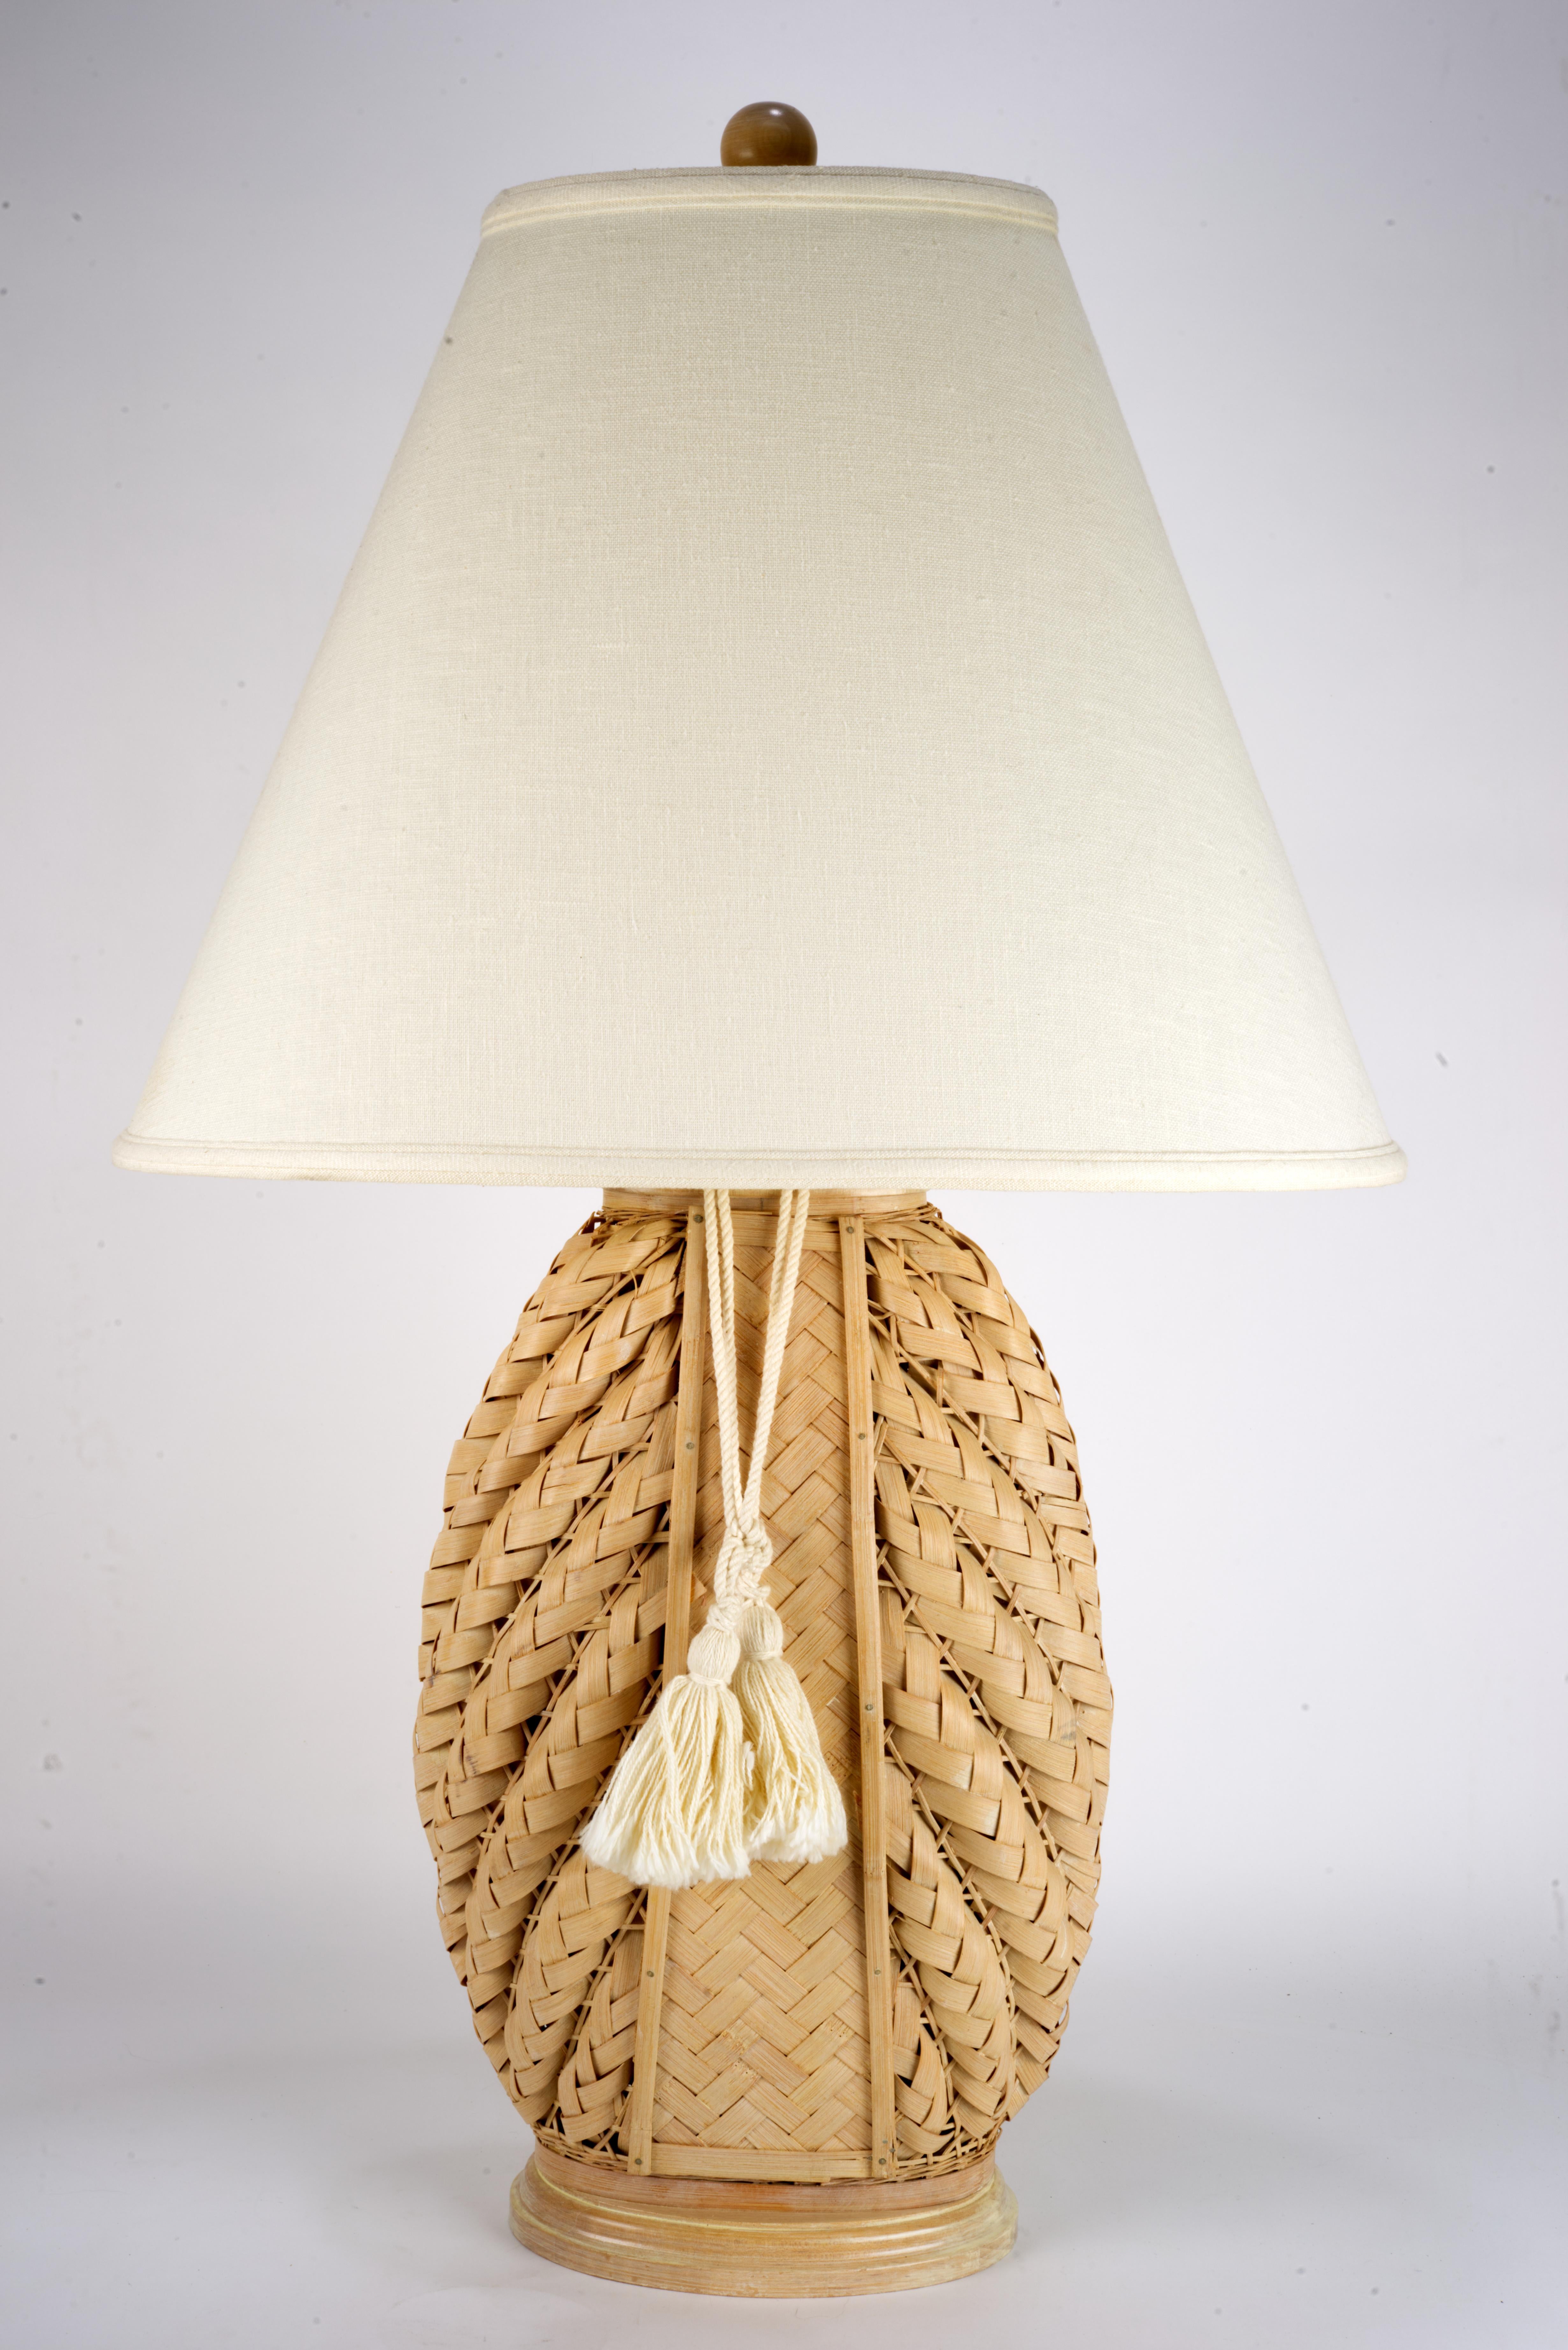  Rare handmade rattan lamp with light wood base has its original lampshade, finial, and decorative tassel. Complex, architectural weave on the sides of the lamp is accentuated by a simple parquet weave stipe in the center.

The lamp is equipped with